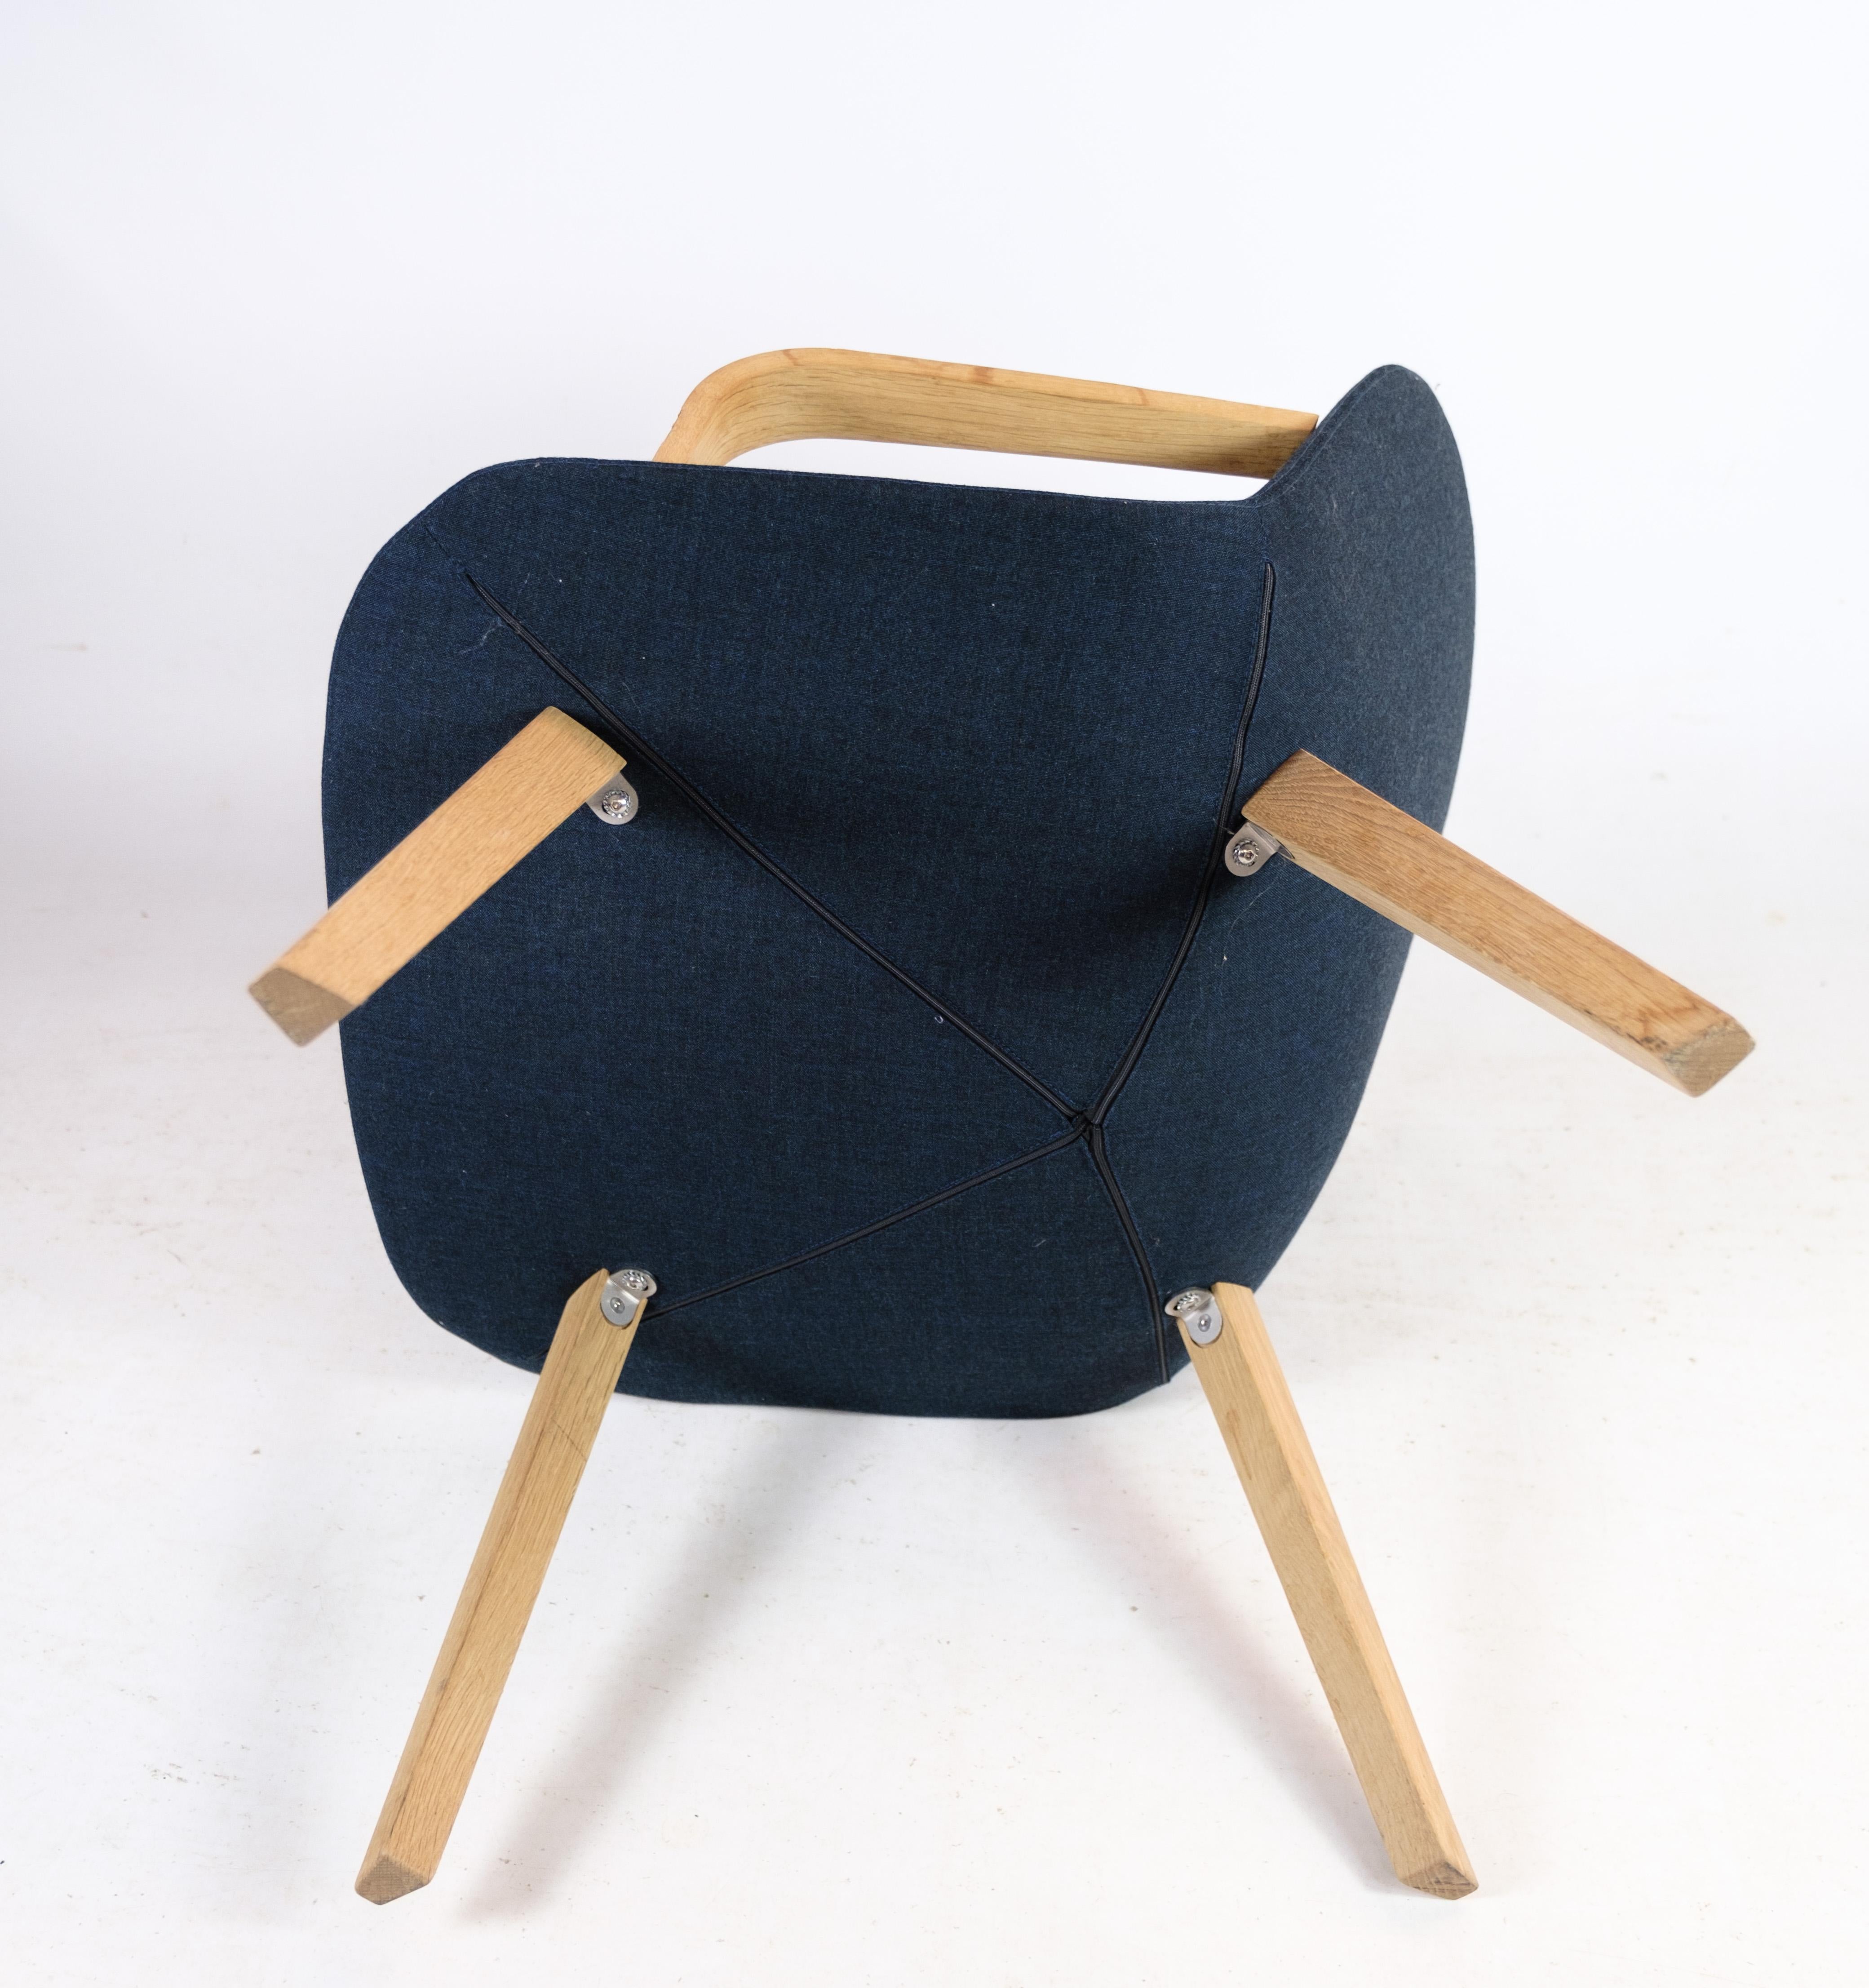 The lounge chair, model EJ 3, meticulously crafted in oak with luxurious blue wool fabric by Erik Jørgensen, as part of the esteemed Eyes series. This exquisite chair seamlessly blends contemporary design with timeless comfort, making it an ideal